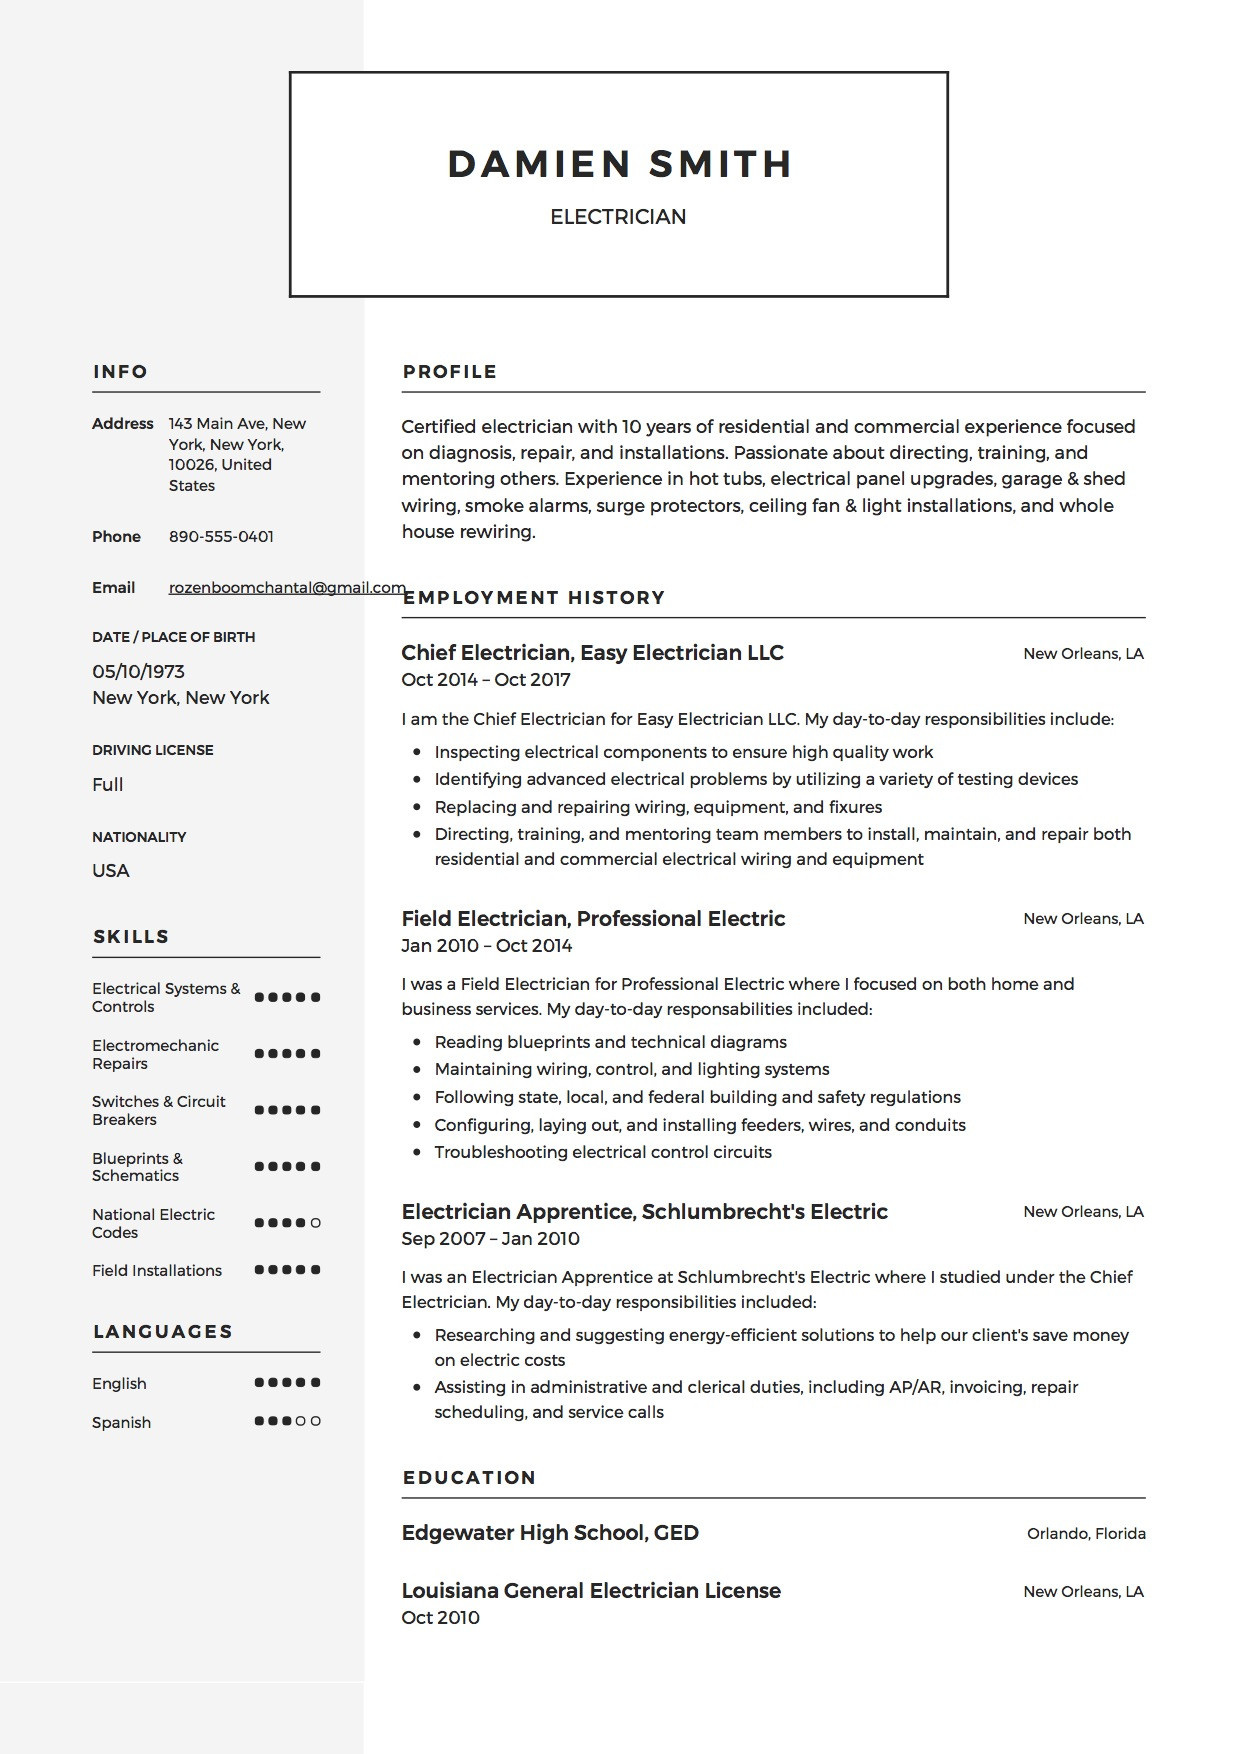 Apprentice Electrician Resume Sample with No Electrical Experience Electrician Resume & Guide 12 Downloads Pdf & Word 2022